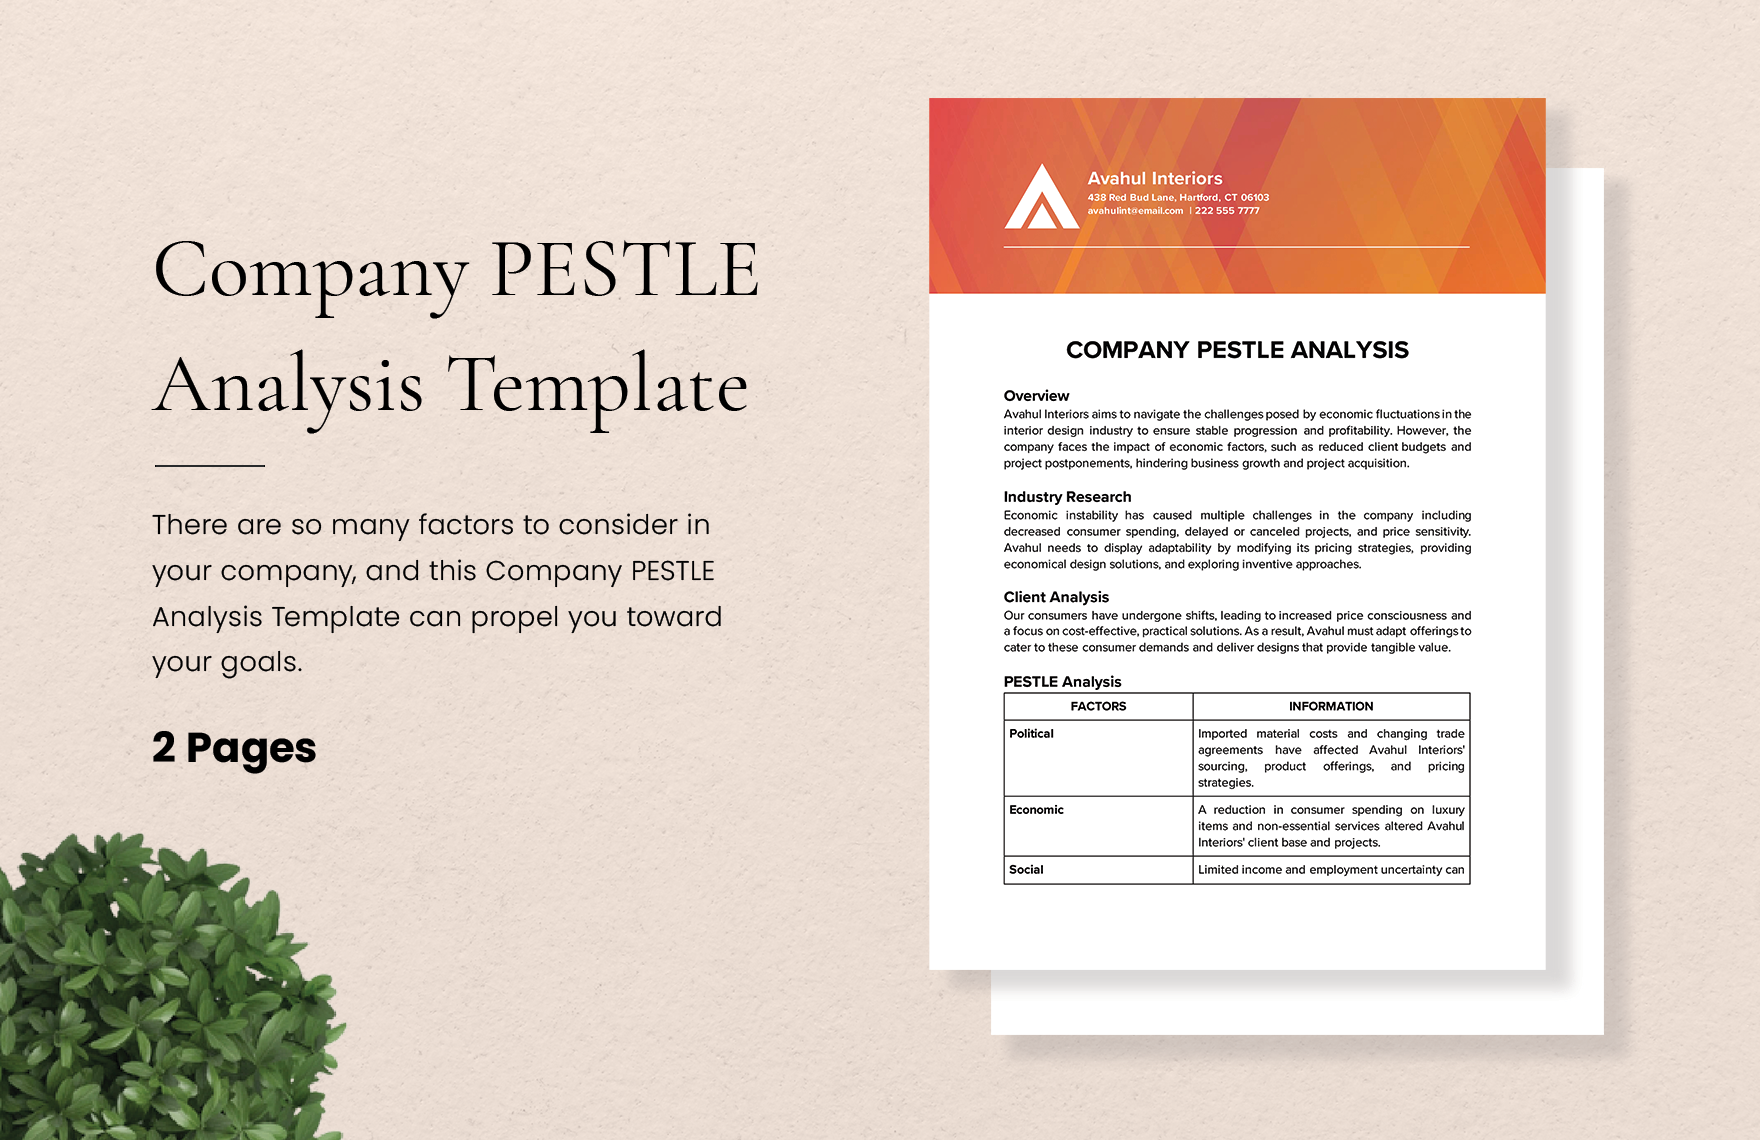 Company PESTLE Analysis Template in Word, Google Docs